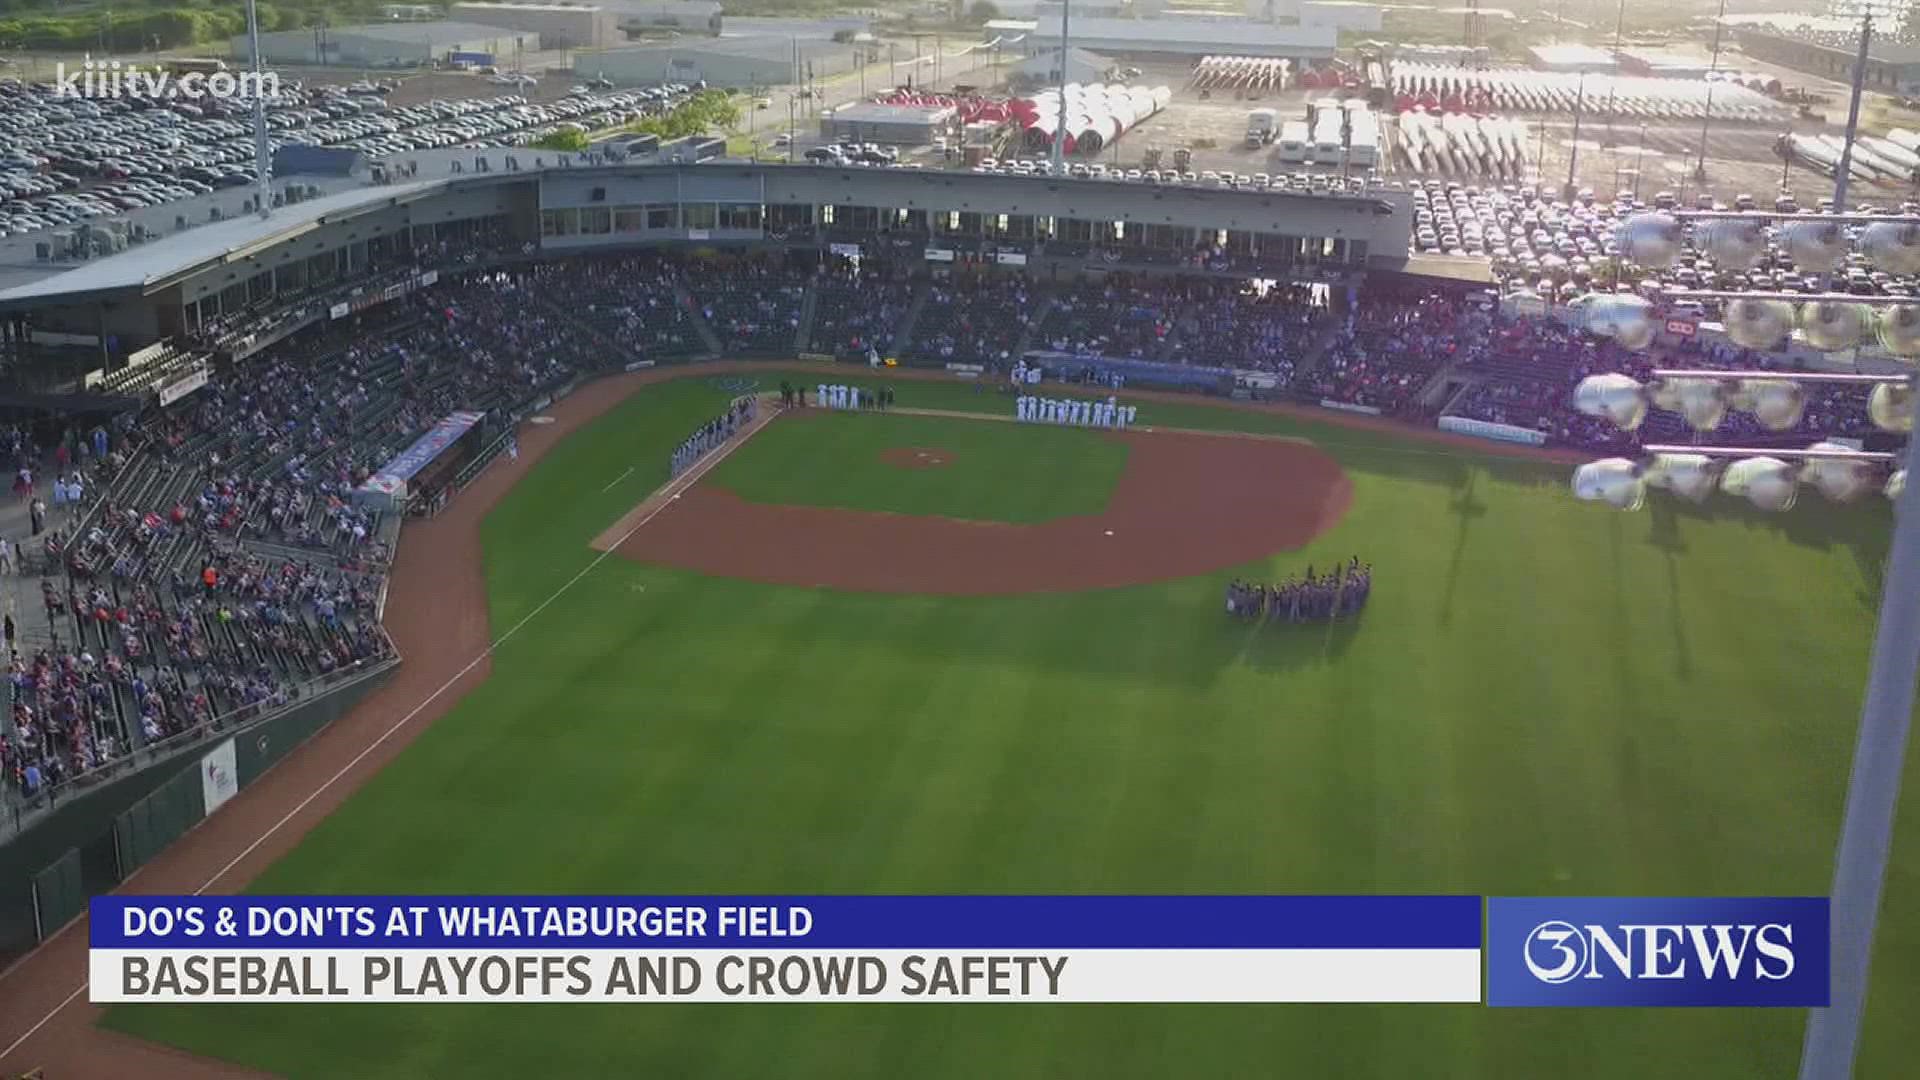 Knock it out of the park boxing event at Whataburger Field